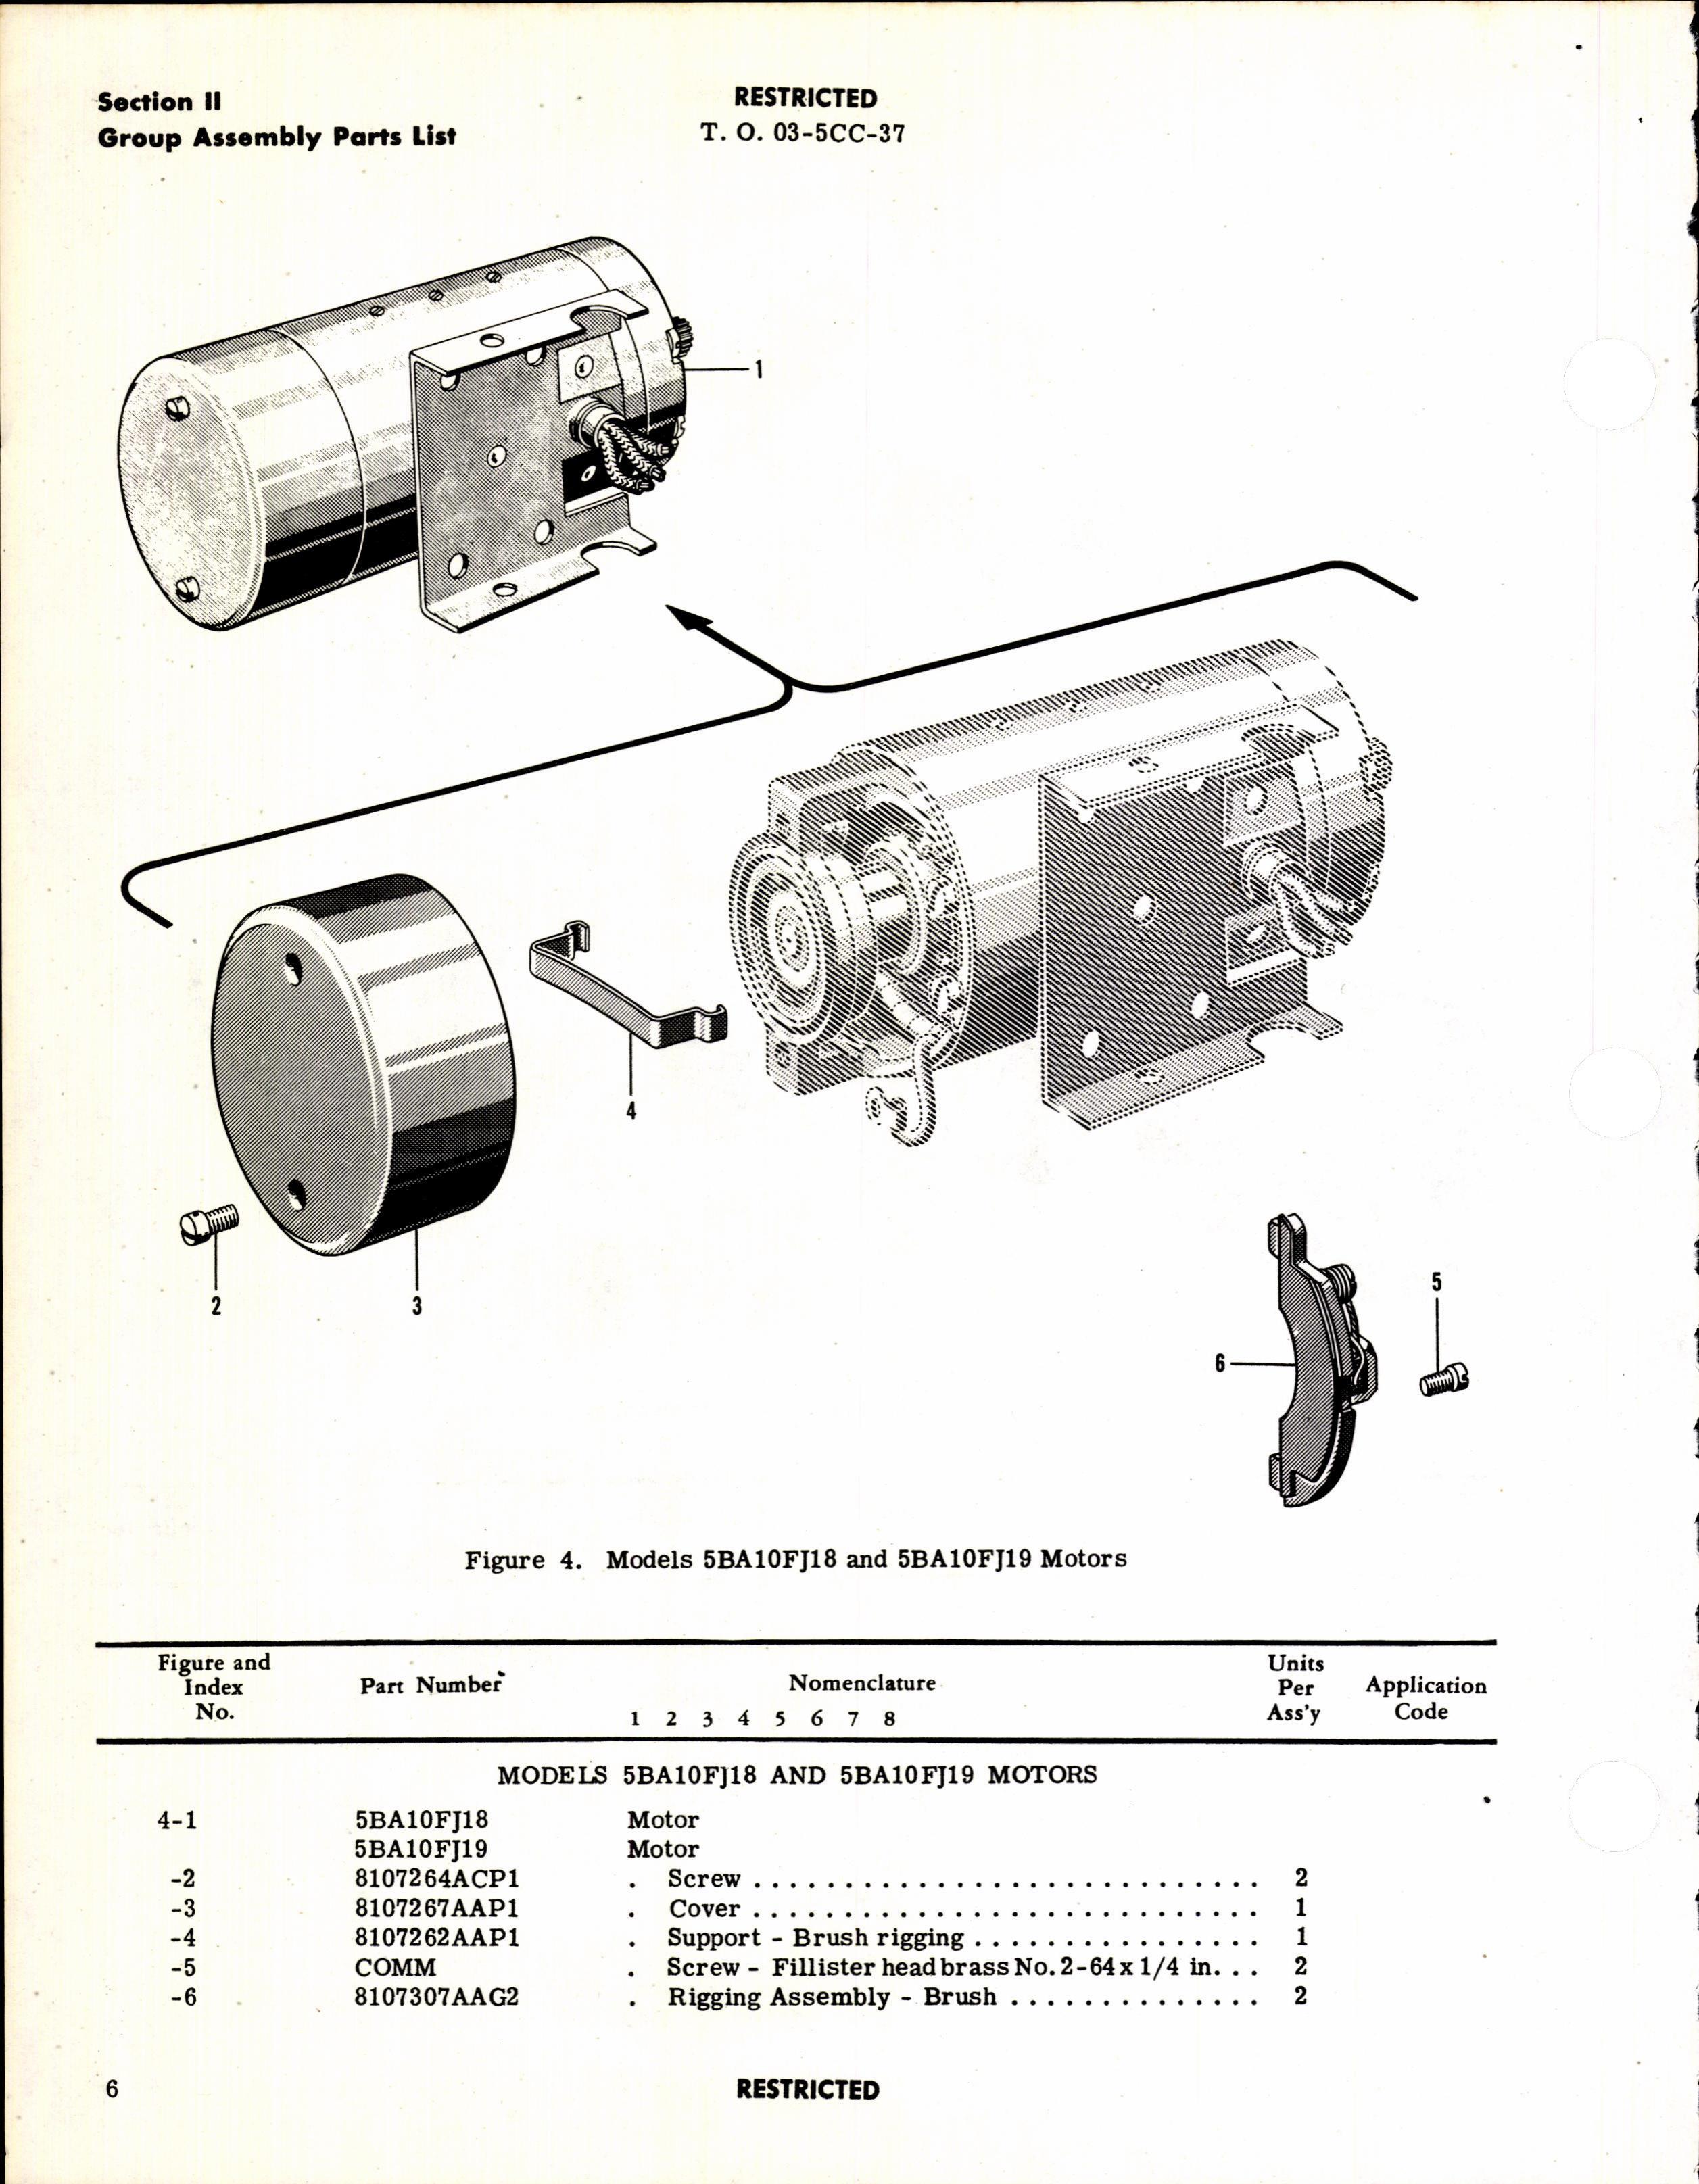 Sample page 8 from AirCorps Library document: Parts Catalog for General Electric Series 5BA10 Aircraft Motor